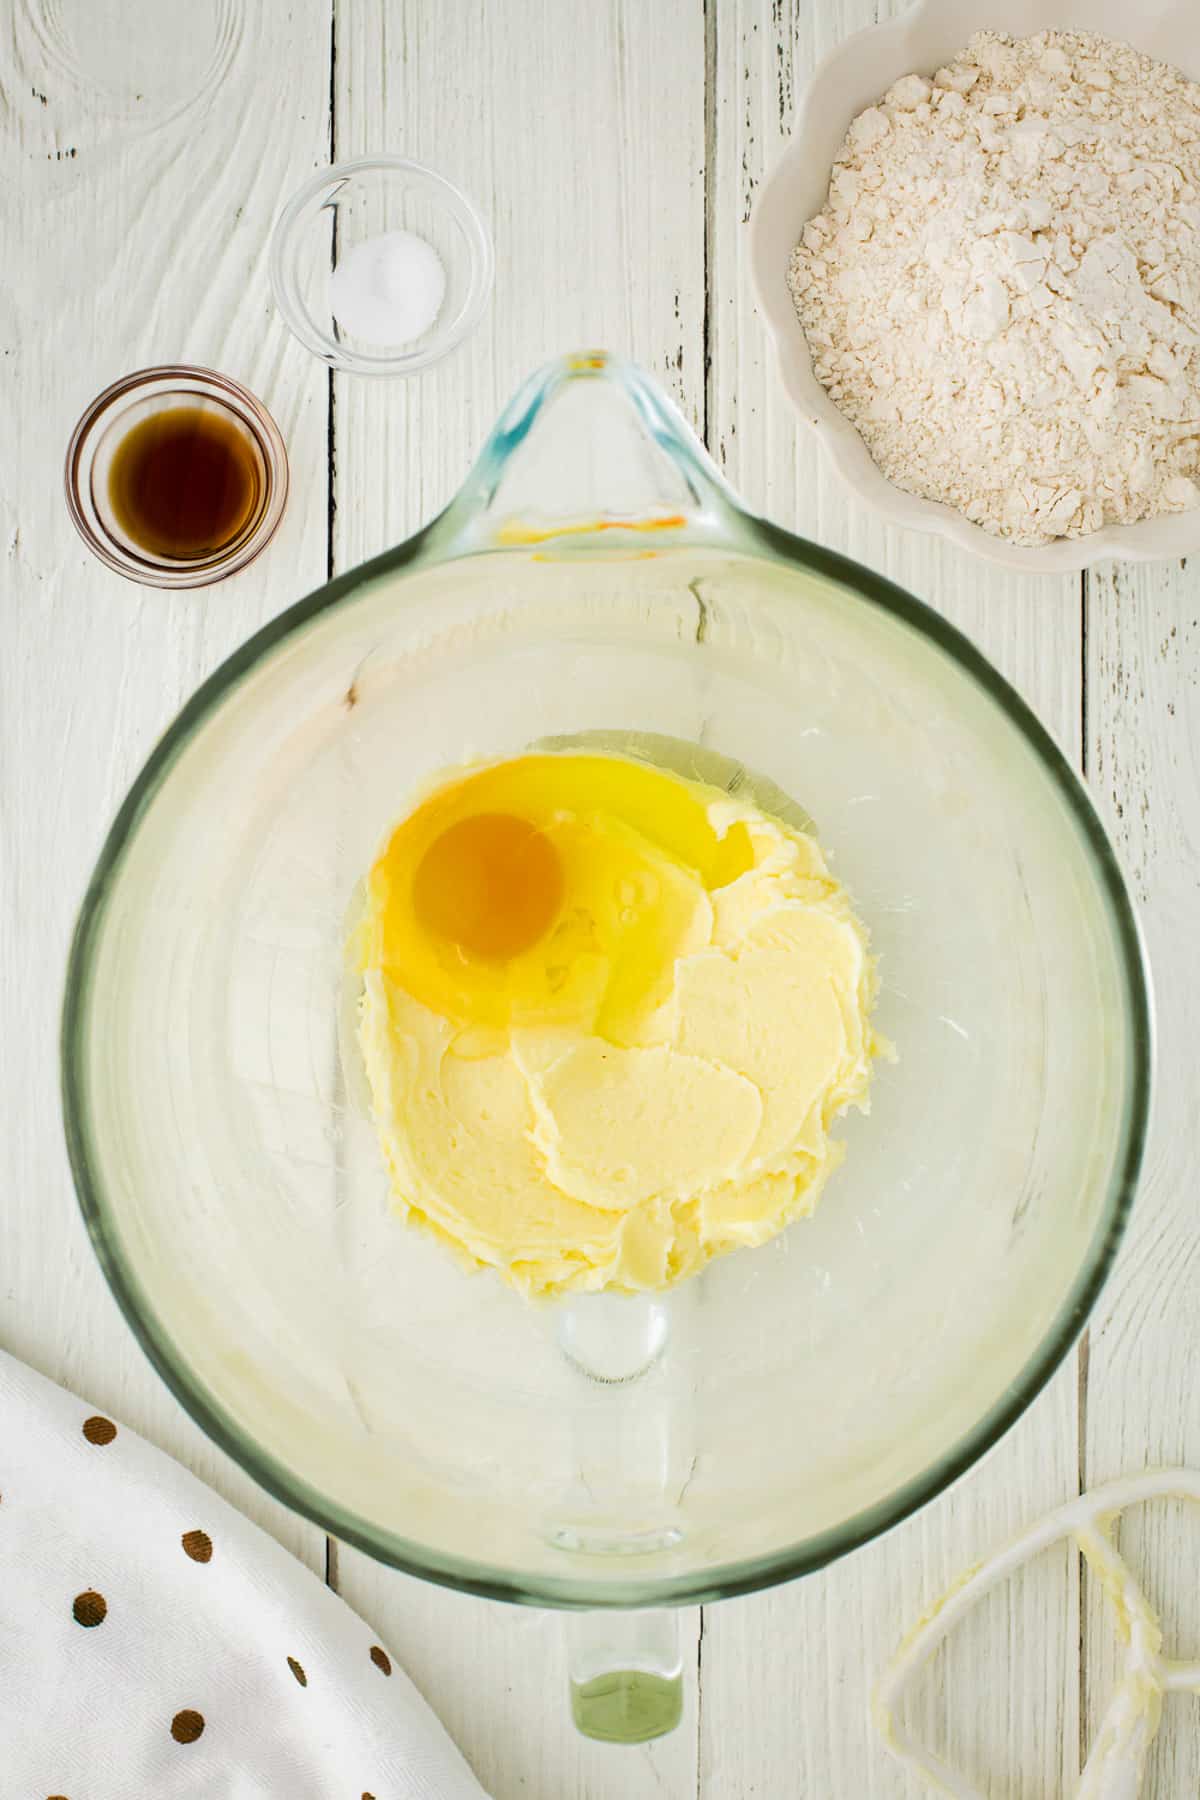 Adding egg to the butter in a glass bowl.